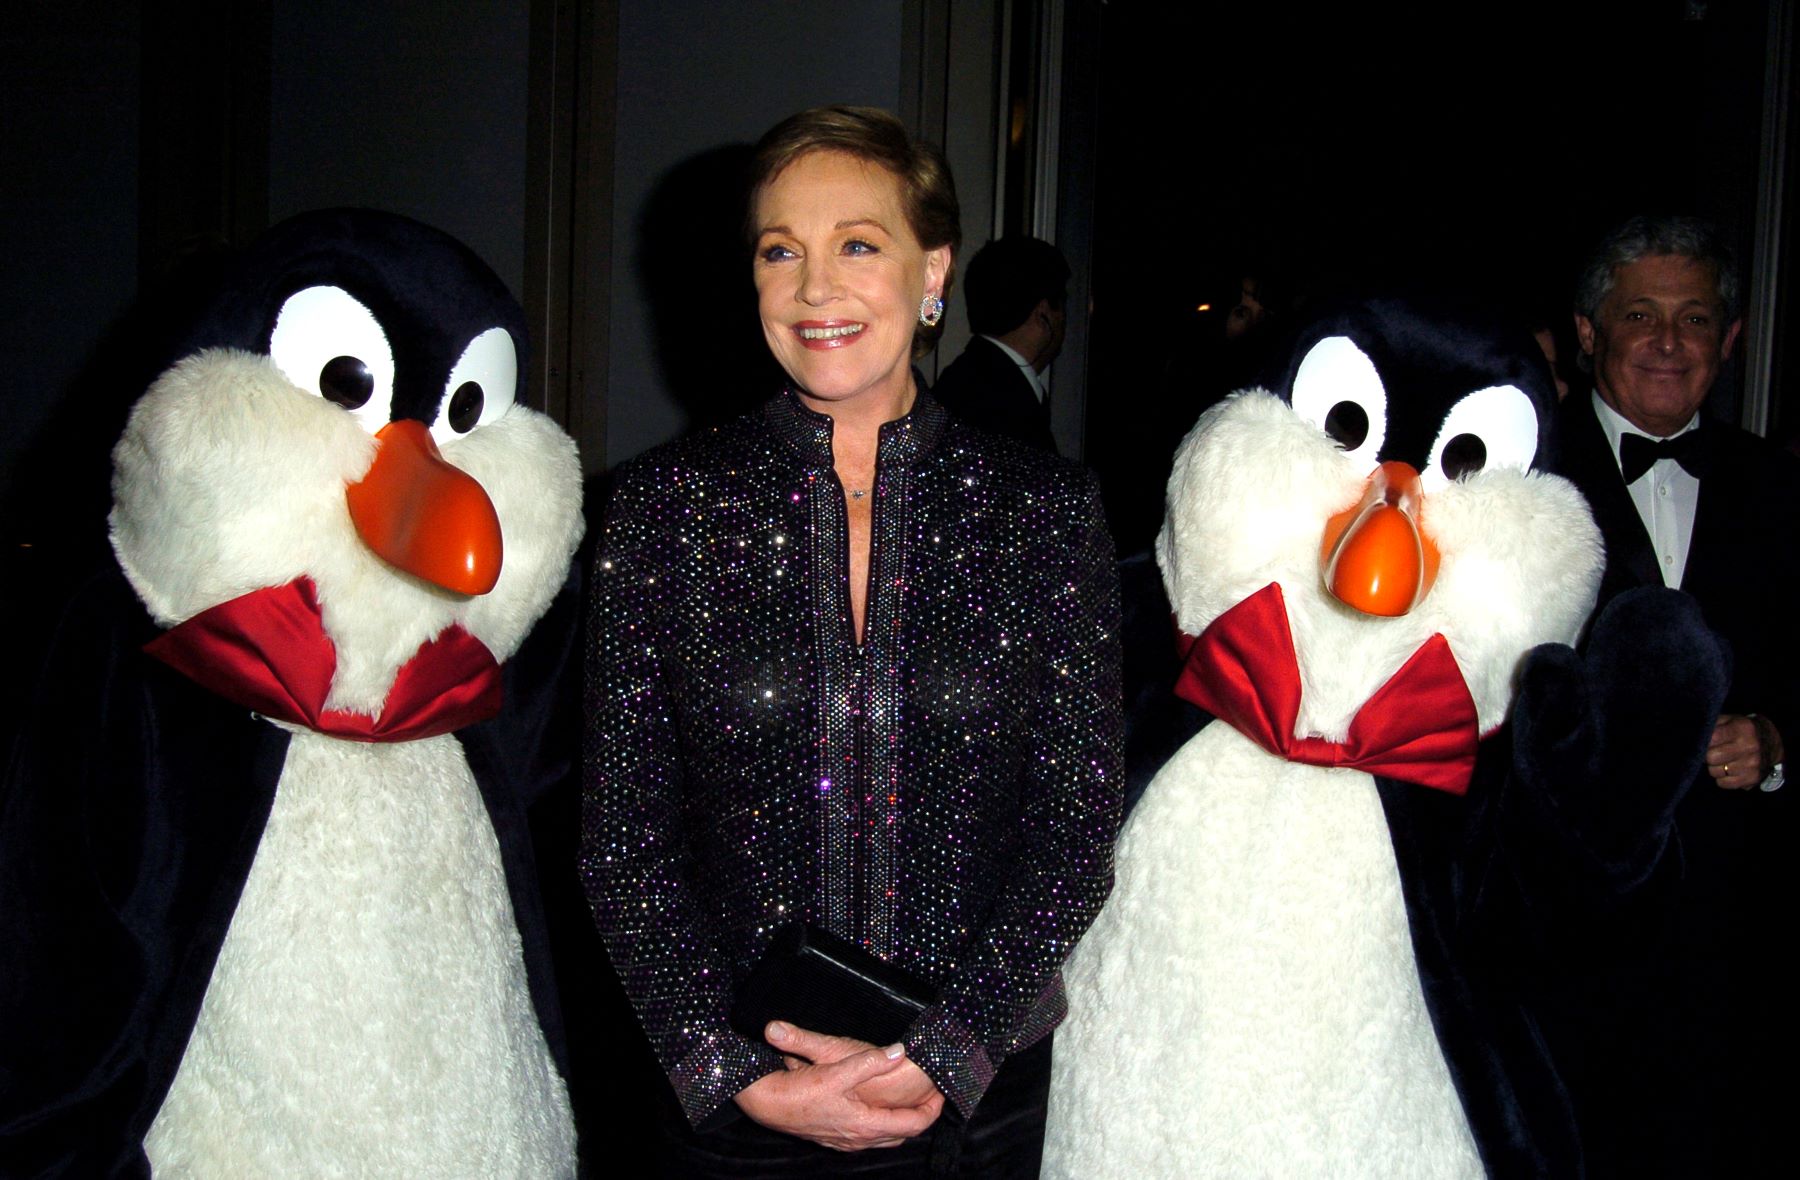 Julie Andrews at the 'Mary Poppins' 40th anniversary at the El Capitan Theatre in Hollywood, California